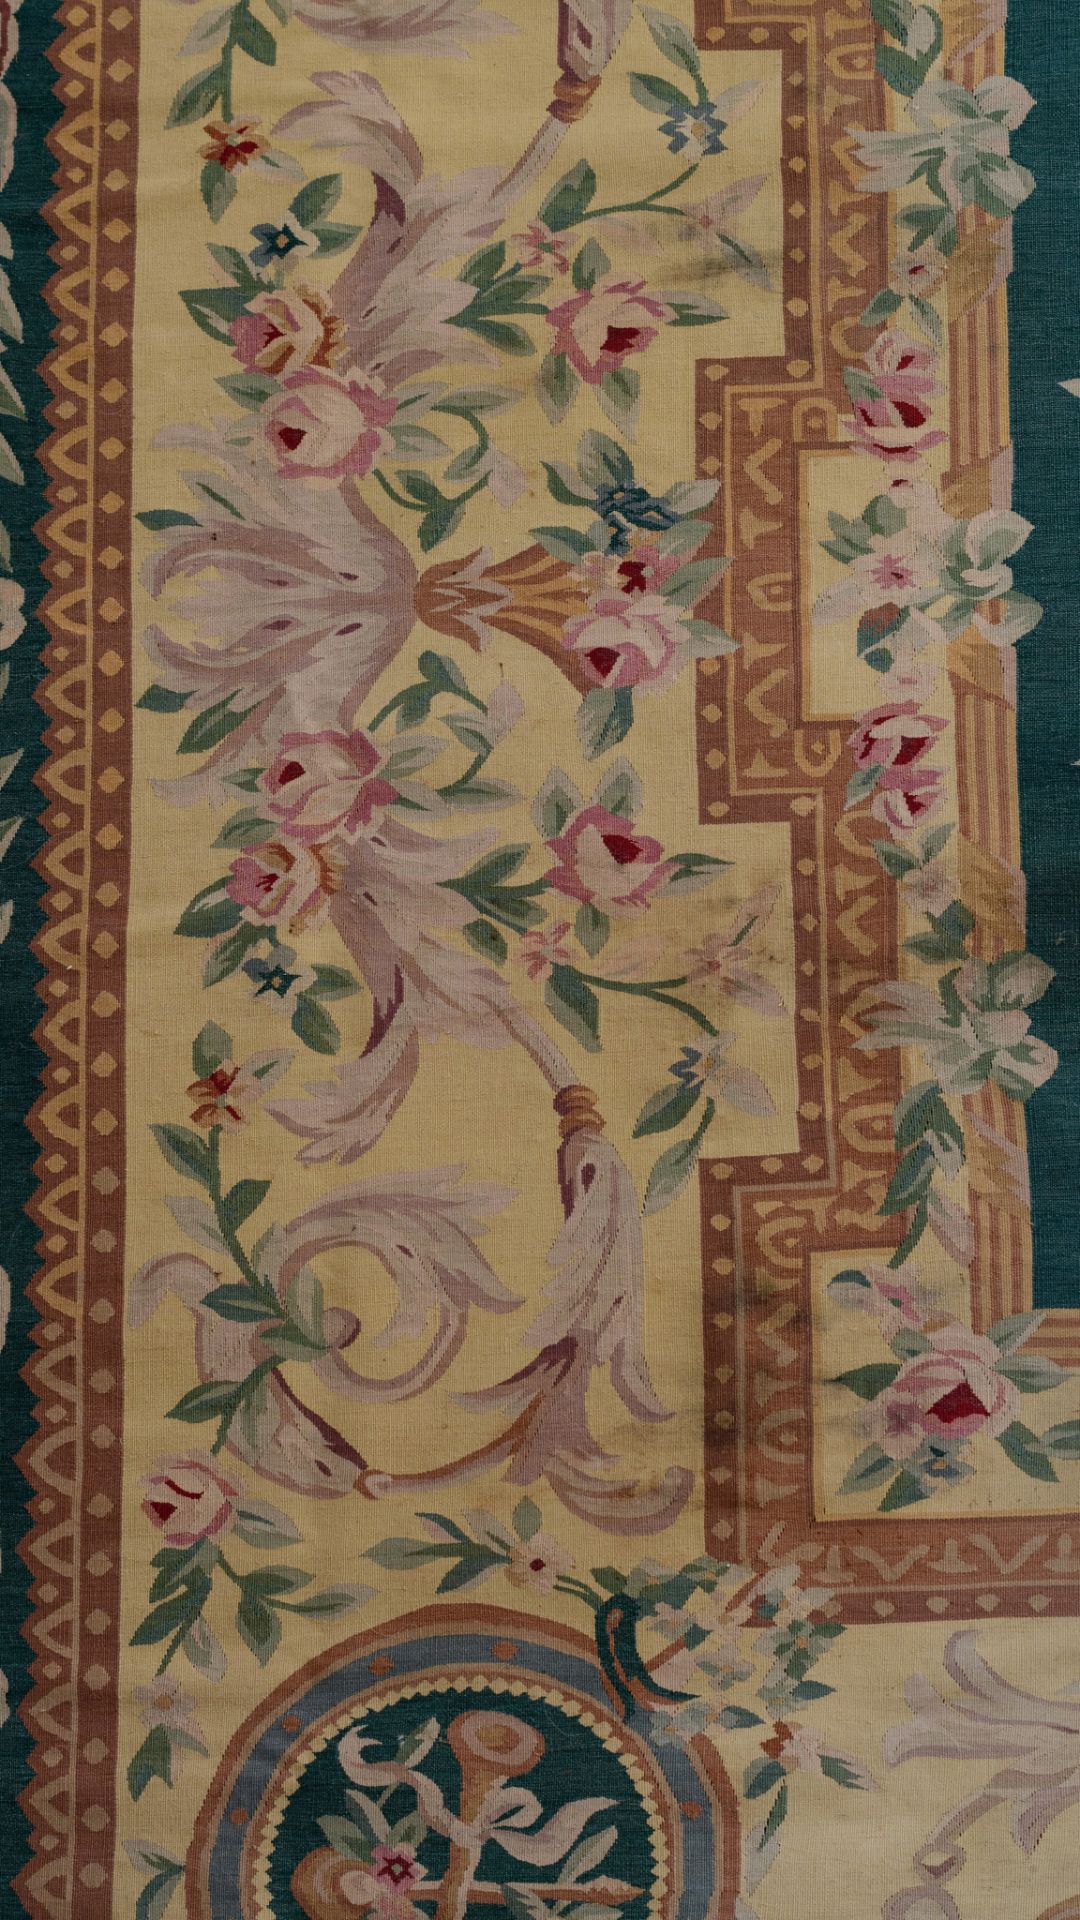 A large Aubusson rug, 553 x 370 cm - Image 8 of 9